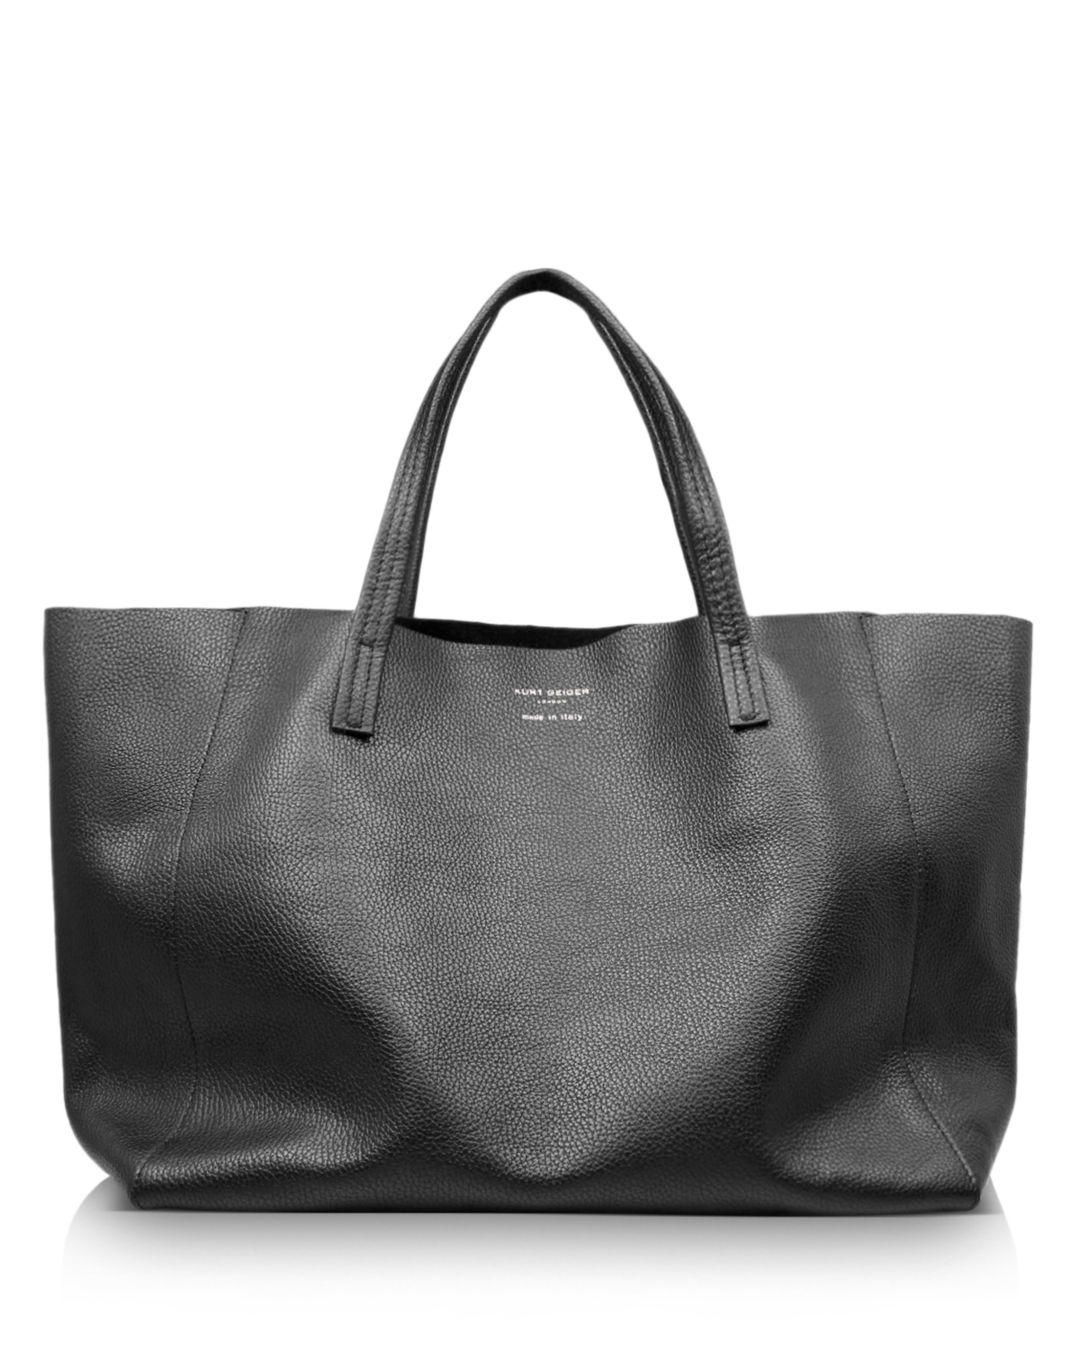 Kurt Geiger Violet Extra Large Horizontal Leather Tote in Black - Lyst